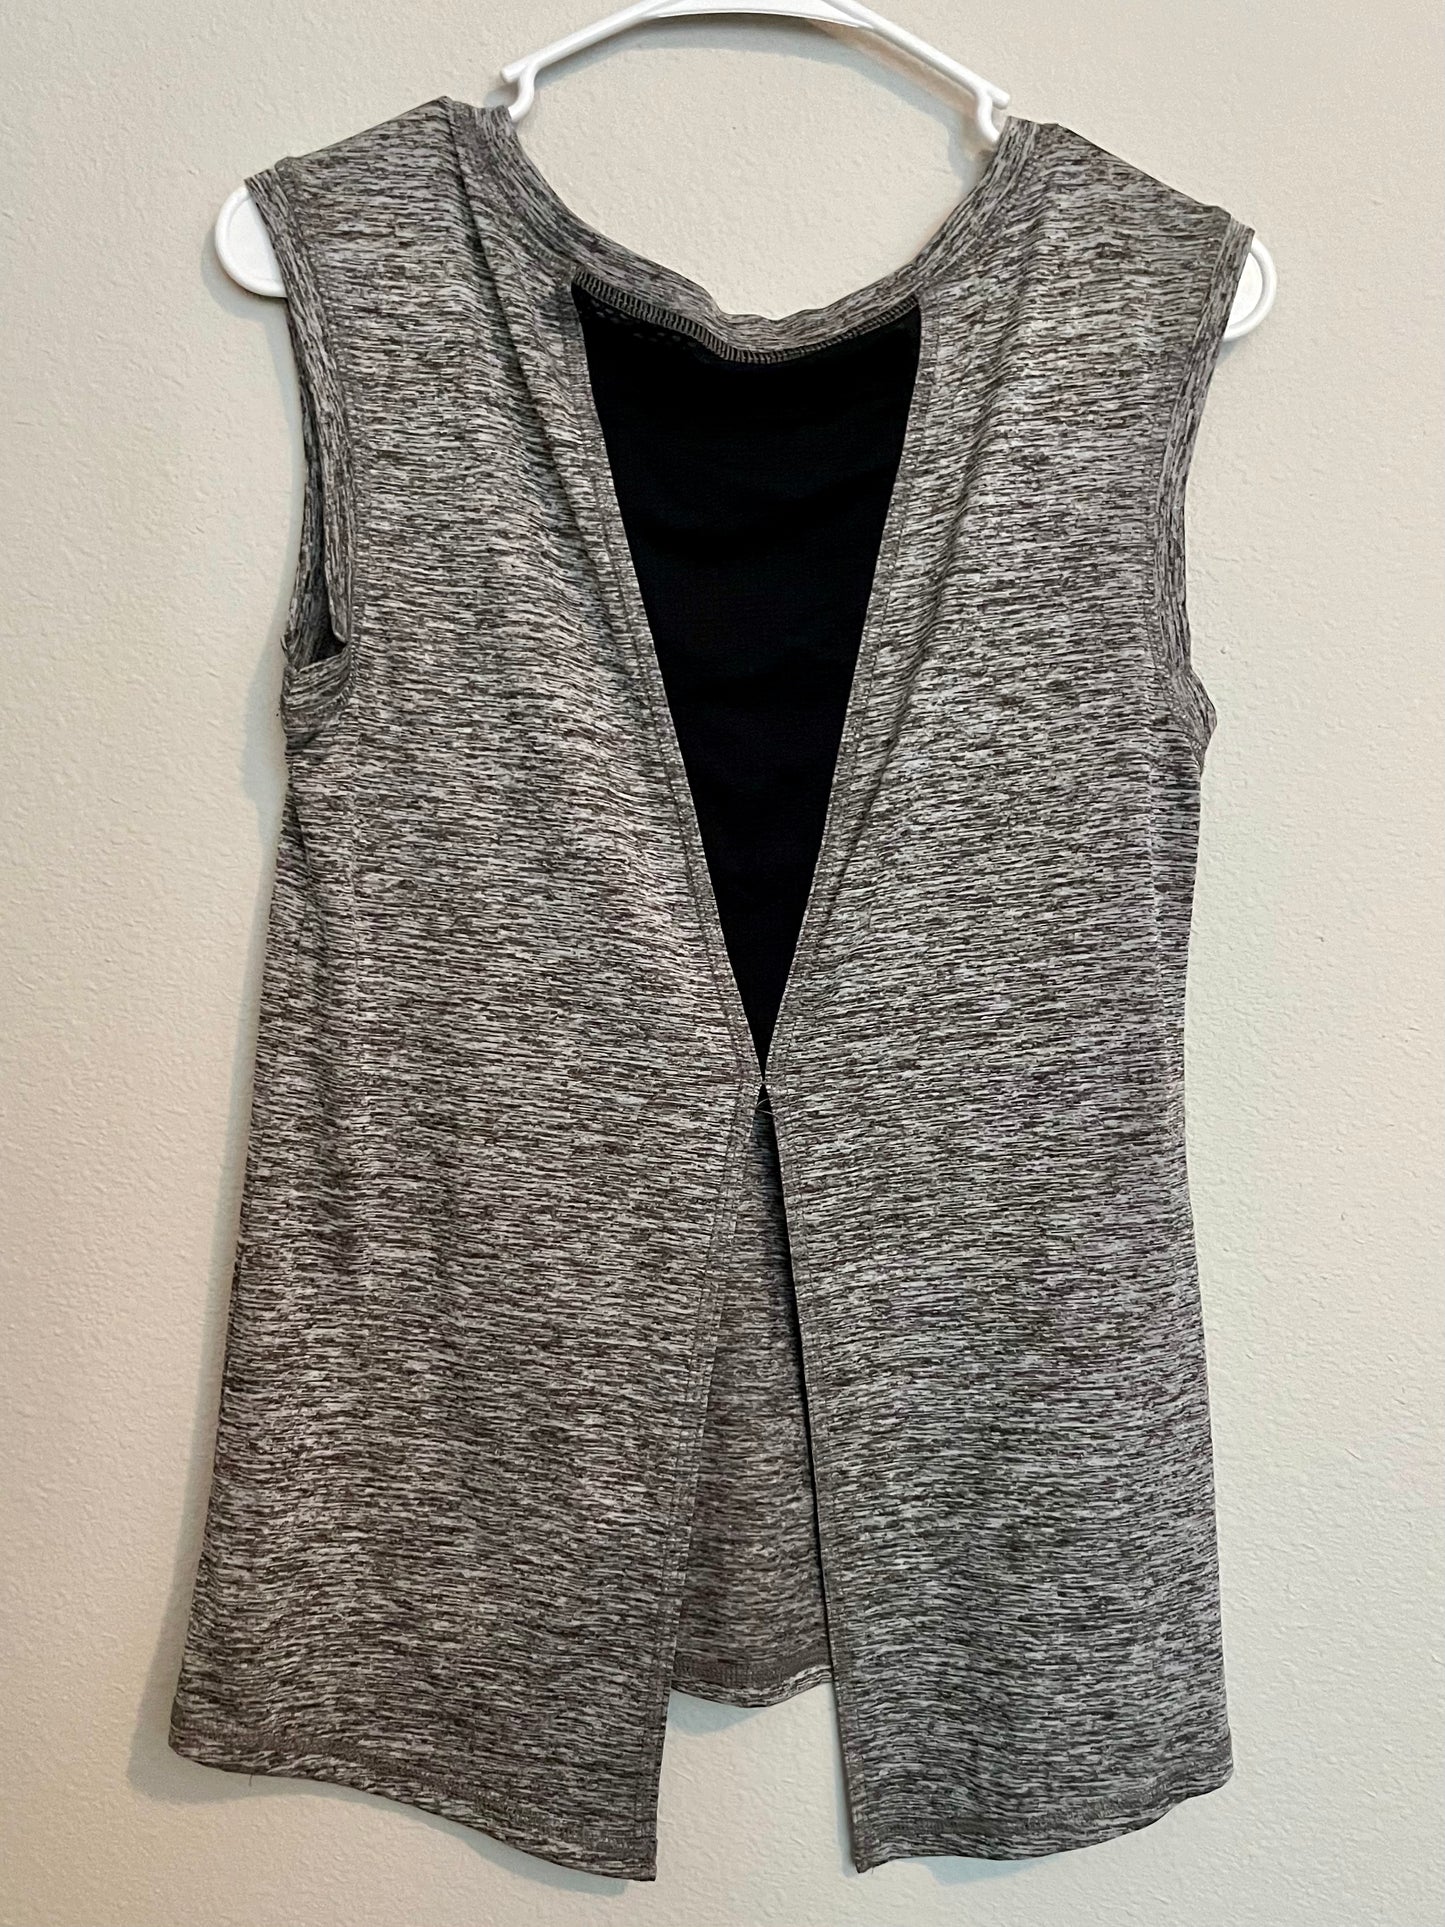 RBX Sleeveless Athletic Top, Size Medium - Tales from the Tangle